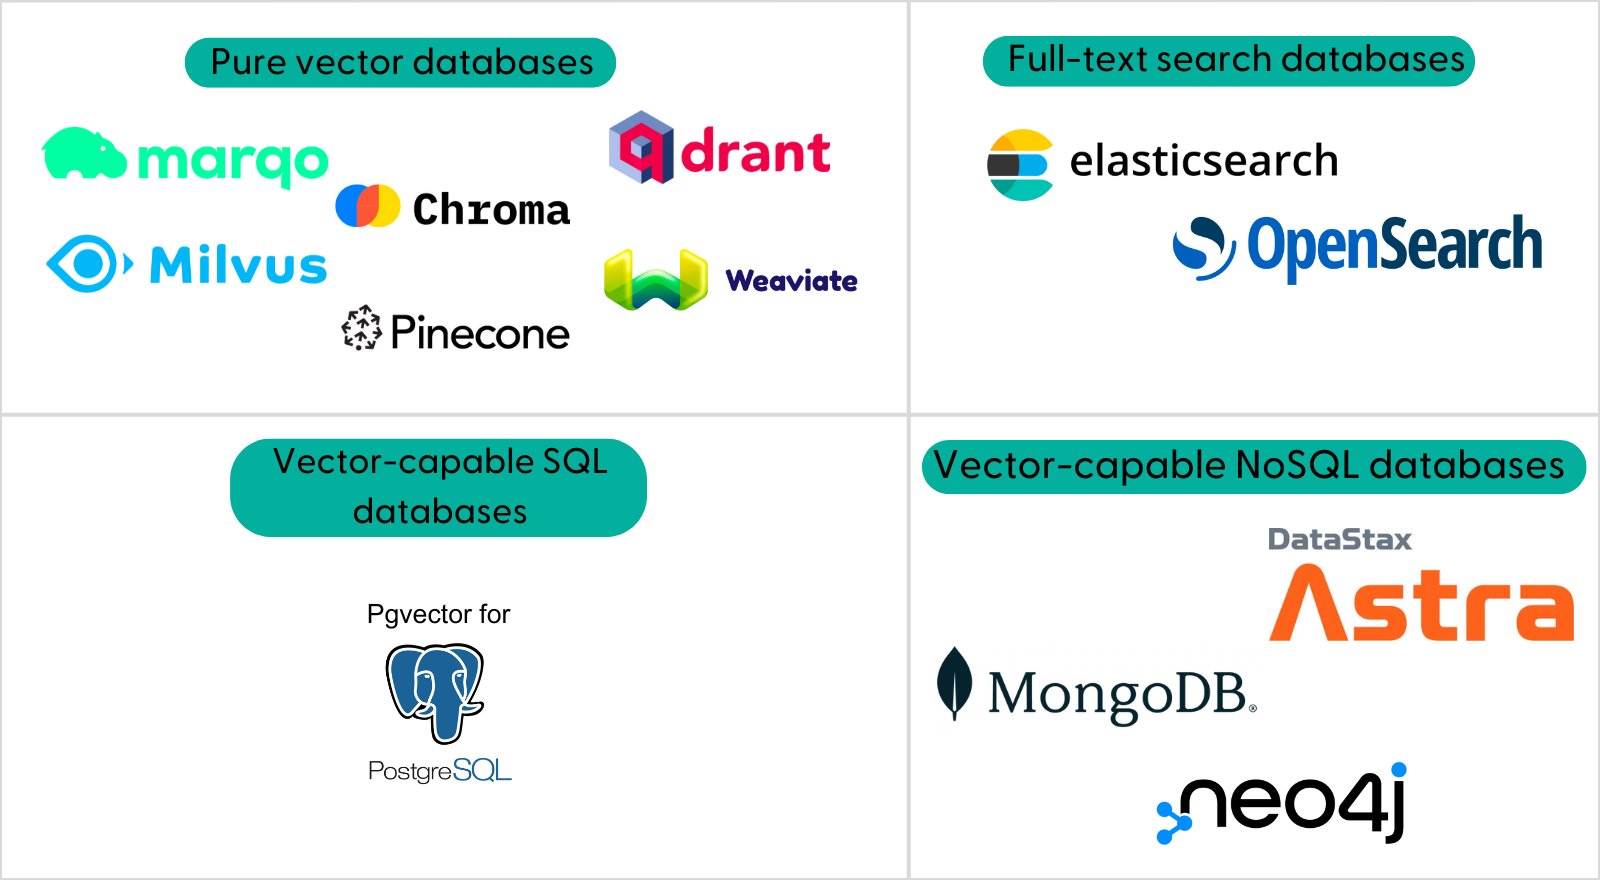 An image showing the logos of Document Stores supported in Haystack 2.0. Pure vector databases include Marqo, Chroma, Qdrant, Pinecone, Milvus and Weaviate. Full-text search databases include Elasticsearch and OpenSearch. Vector-capable SQL databases include pgvector. Vector-capable NoSQL databases include Astra DB, MongoDB, Neo4j..